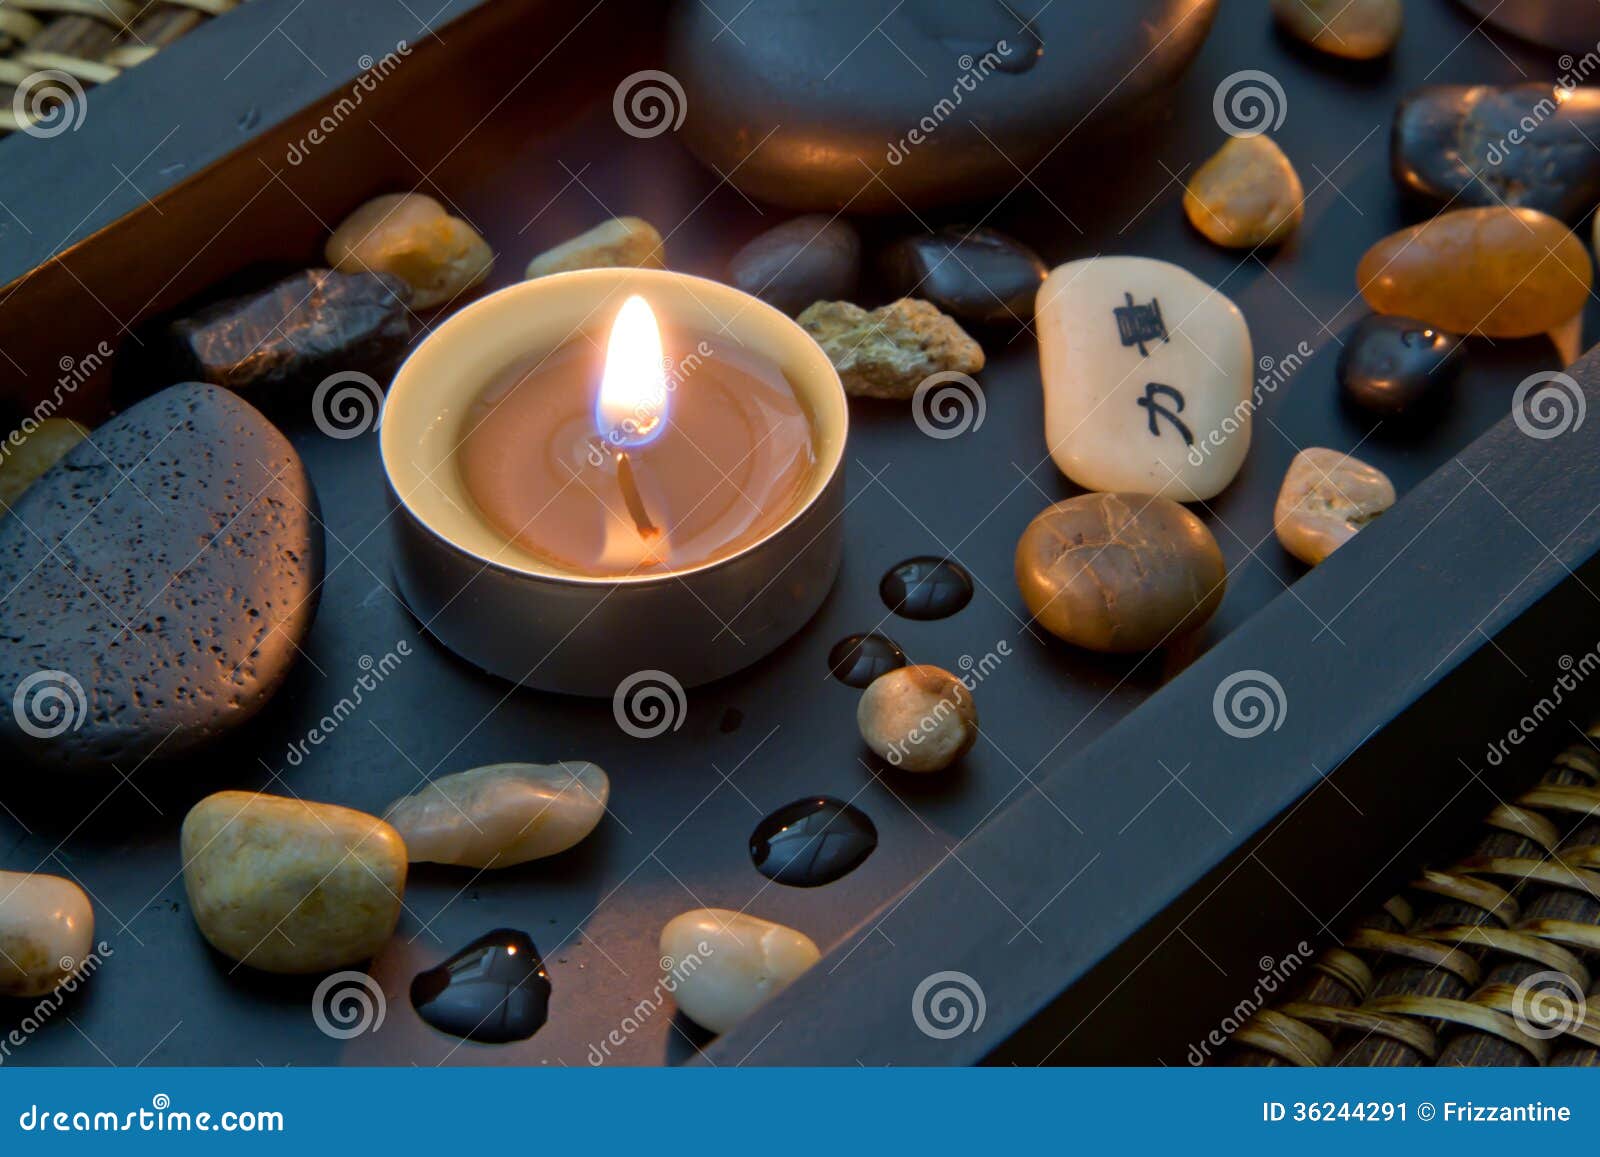 Spa Decoration In Asian Style With Stones And Candle Stock Image ...